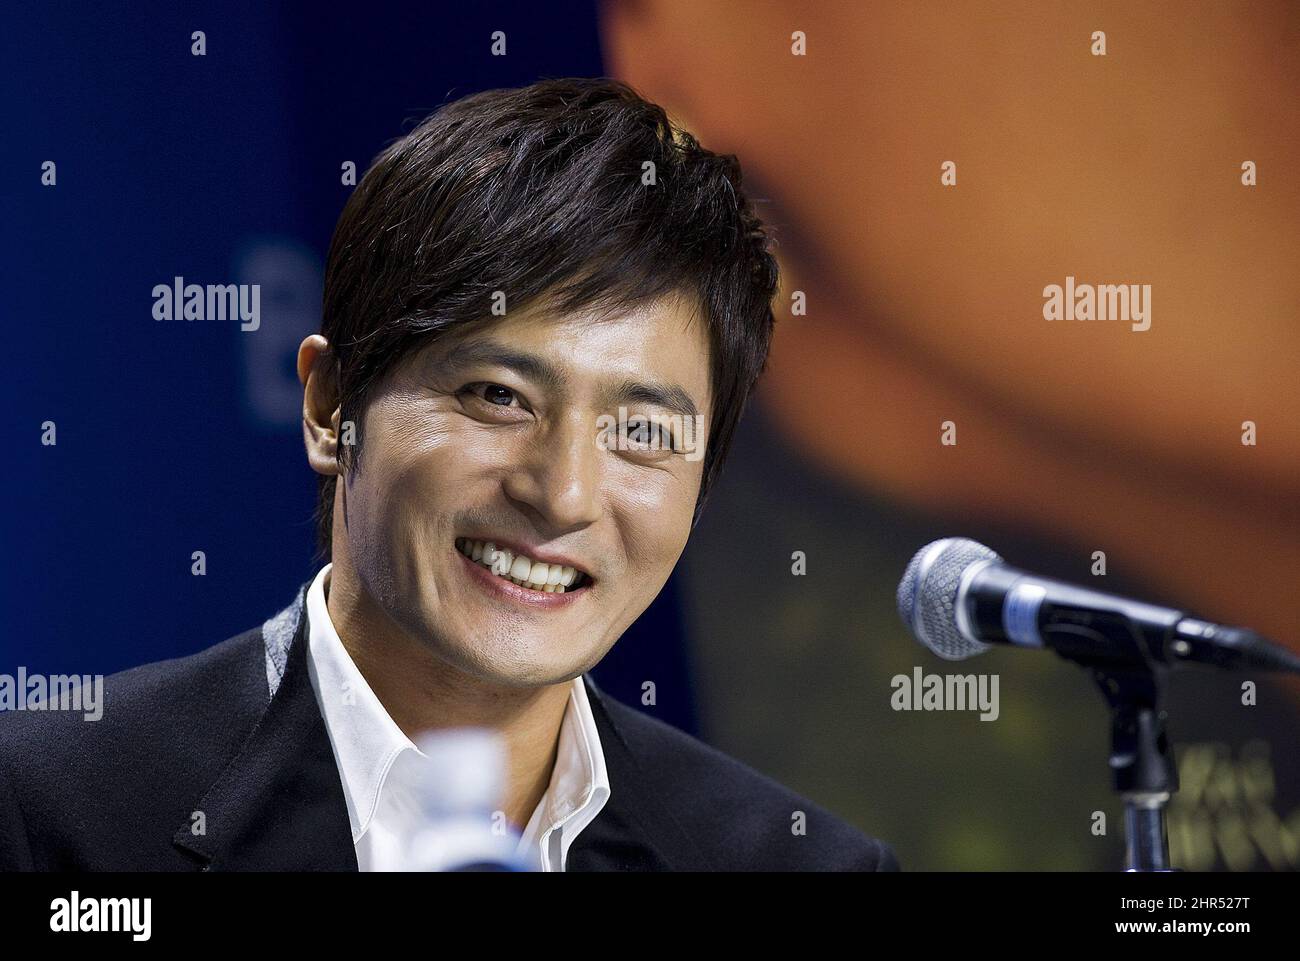 Korean actor Jang Dong-gun smiles during the press conference for the film "Dangerous Liaisons" during the 2012 Toronto International Film Festival in Toronto on Monday, Sept. 10, 2012. (AP Photo/The Canadian Press, Aaron Vincent Elkaim) Stock Photo